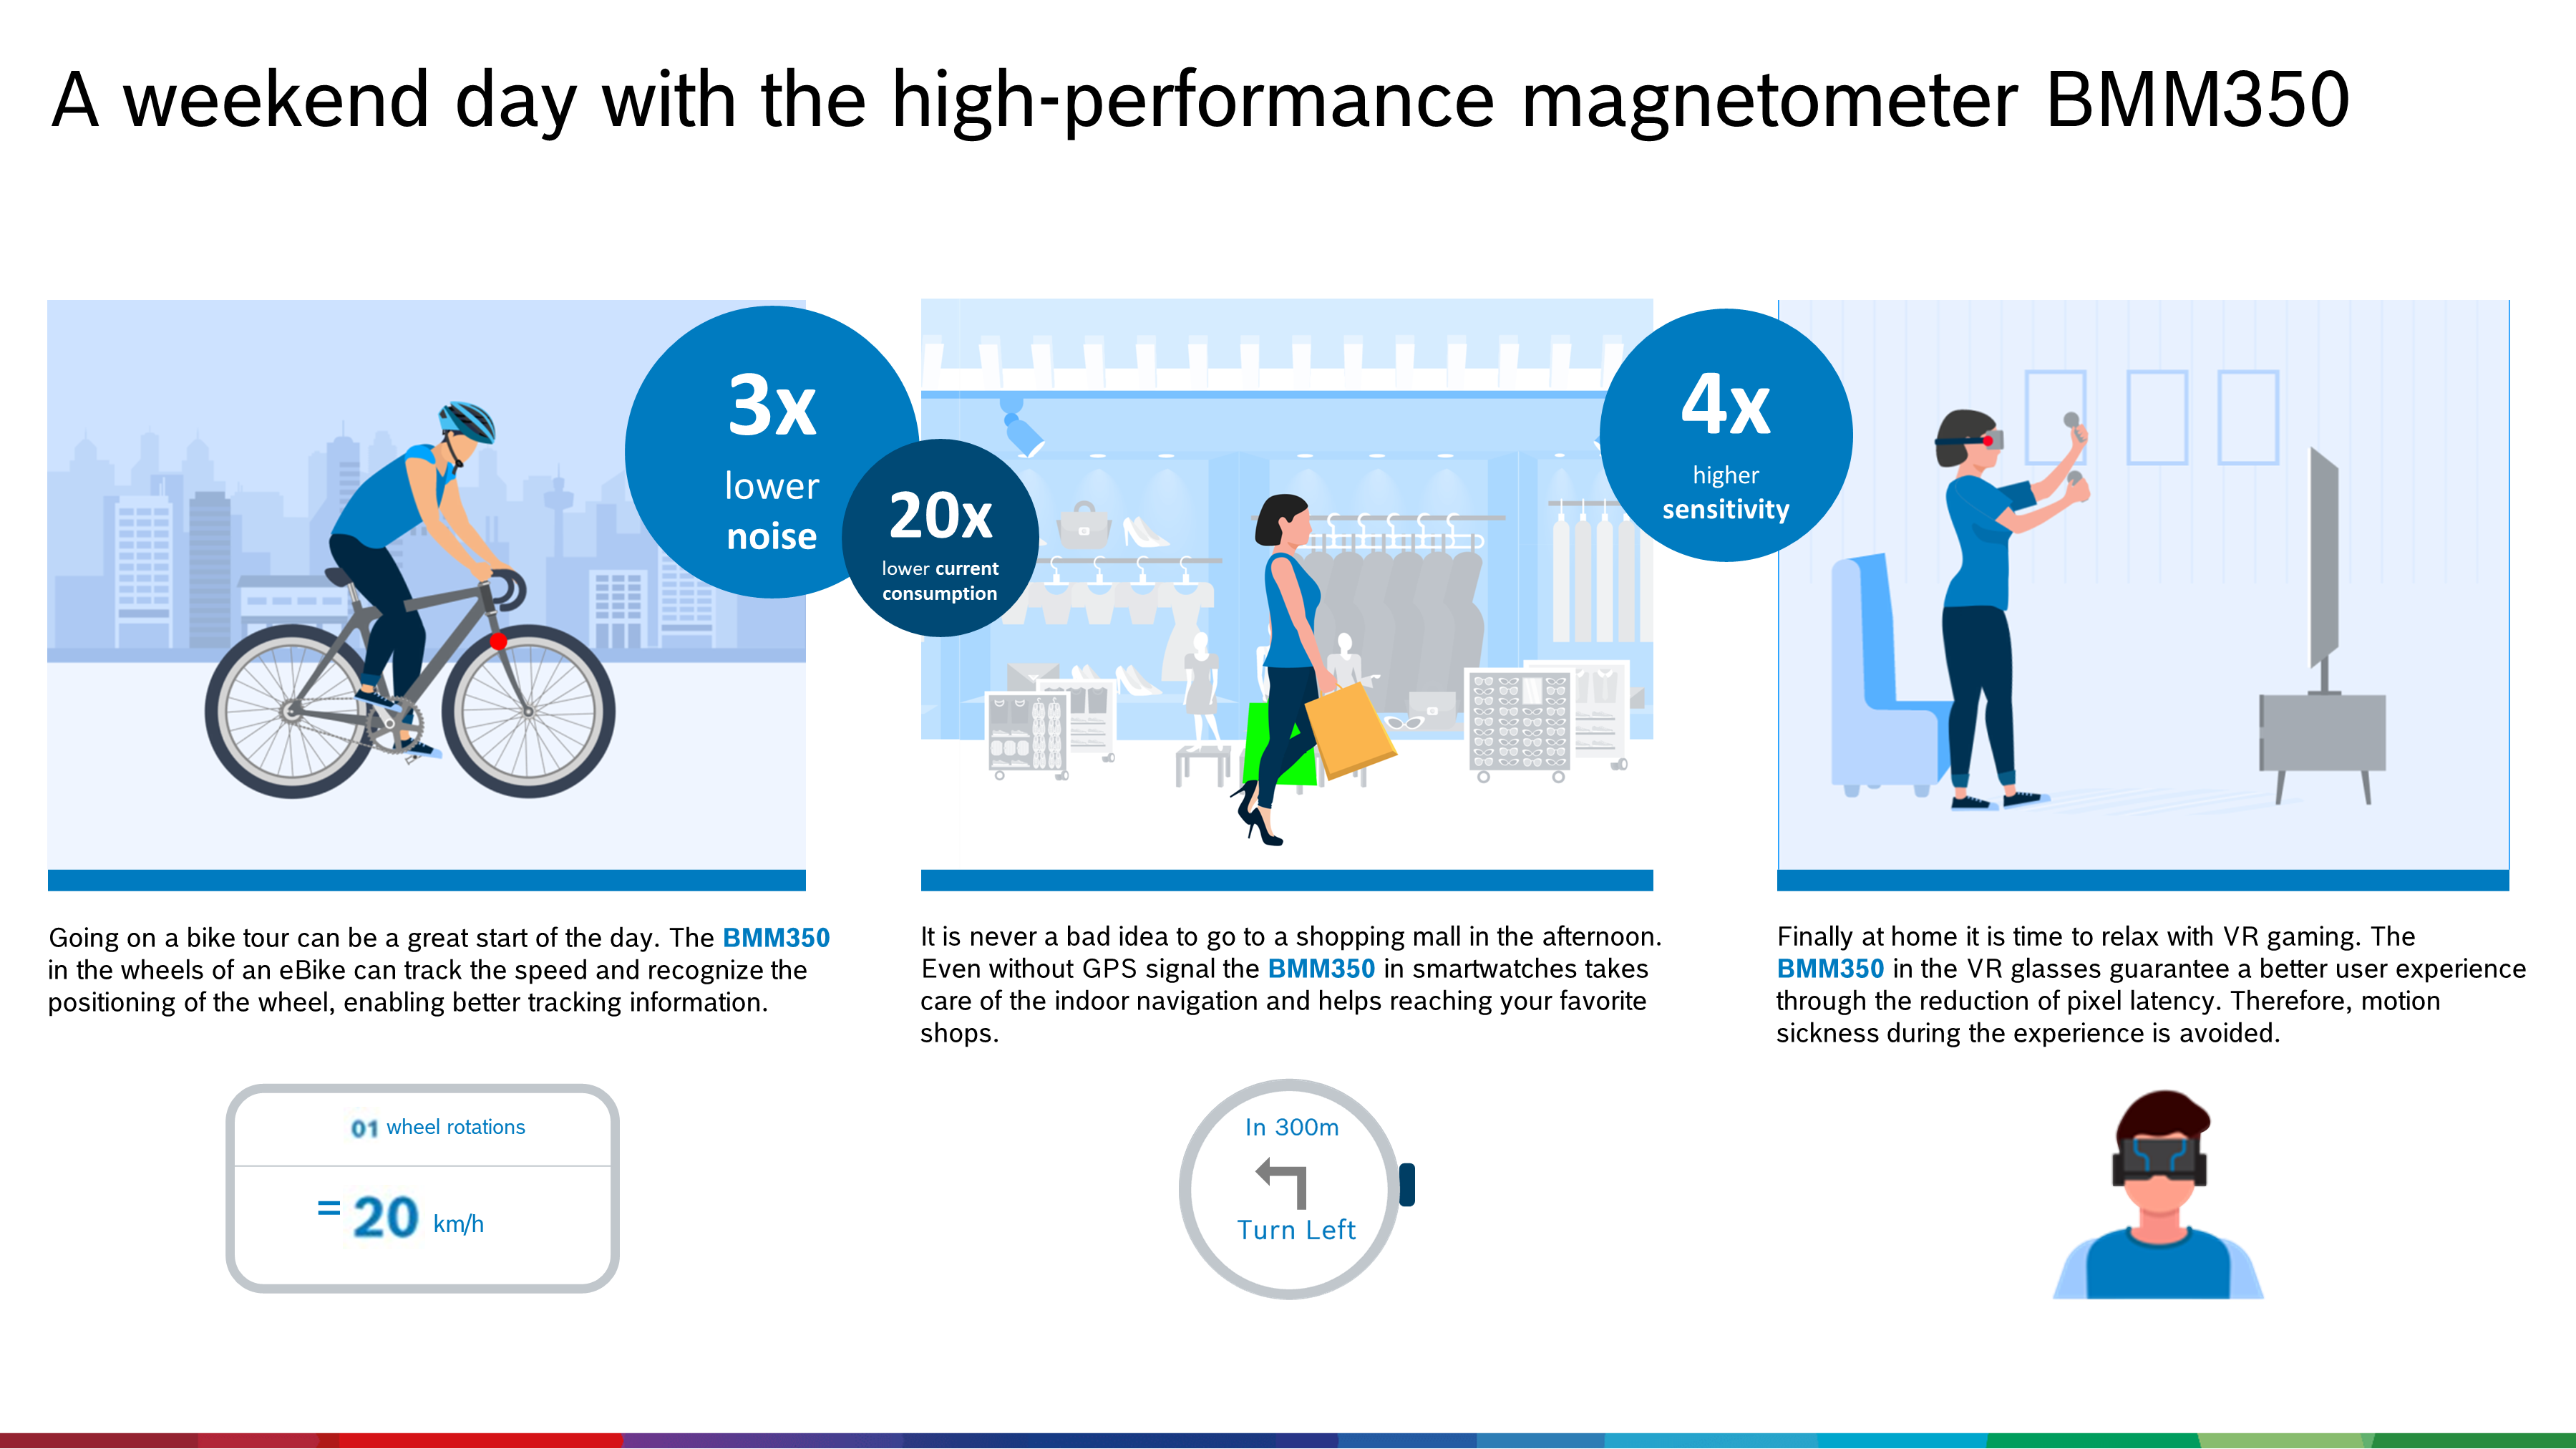 A weekend day with the high-performance magnetometer BMM350